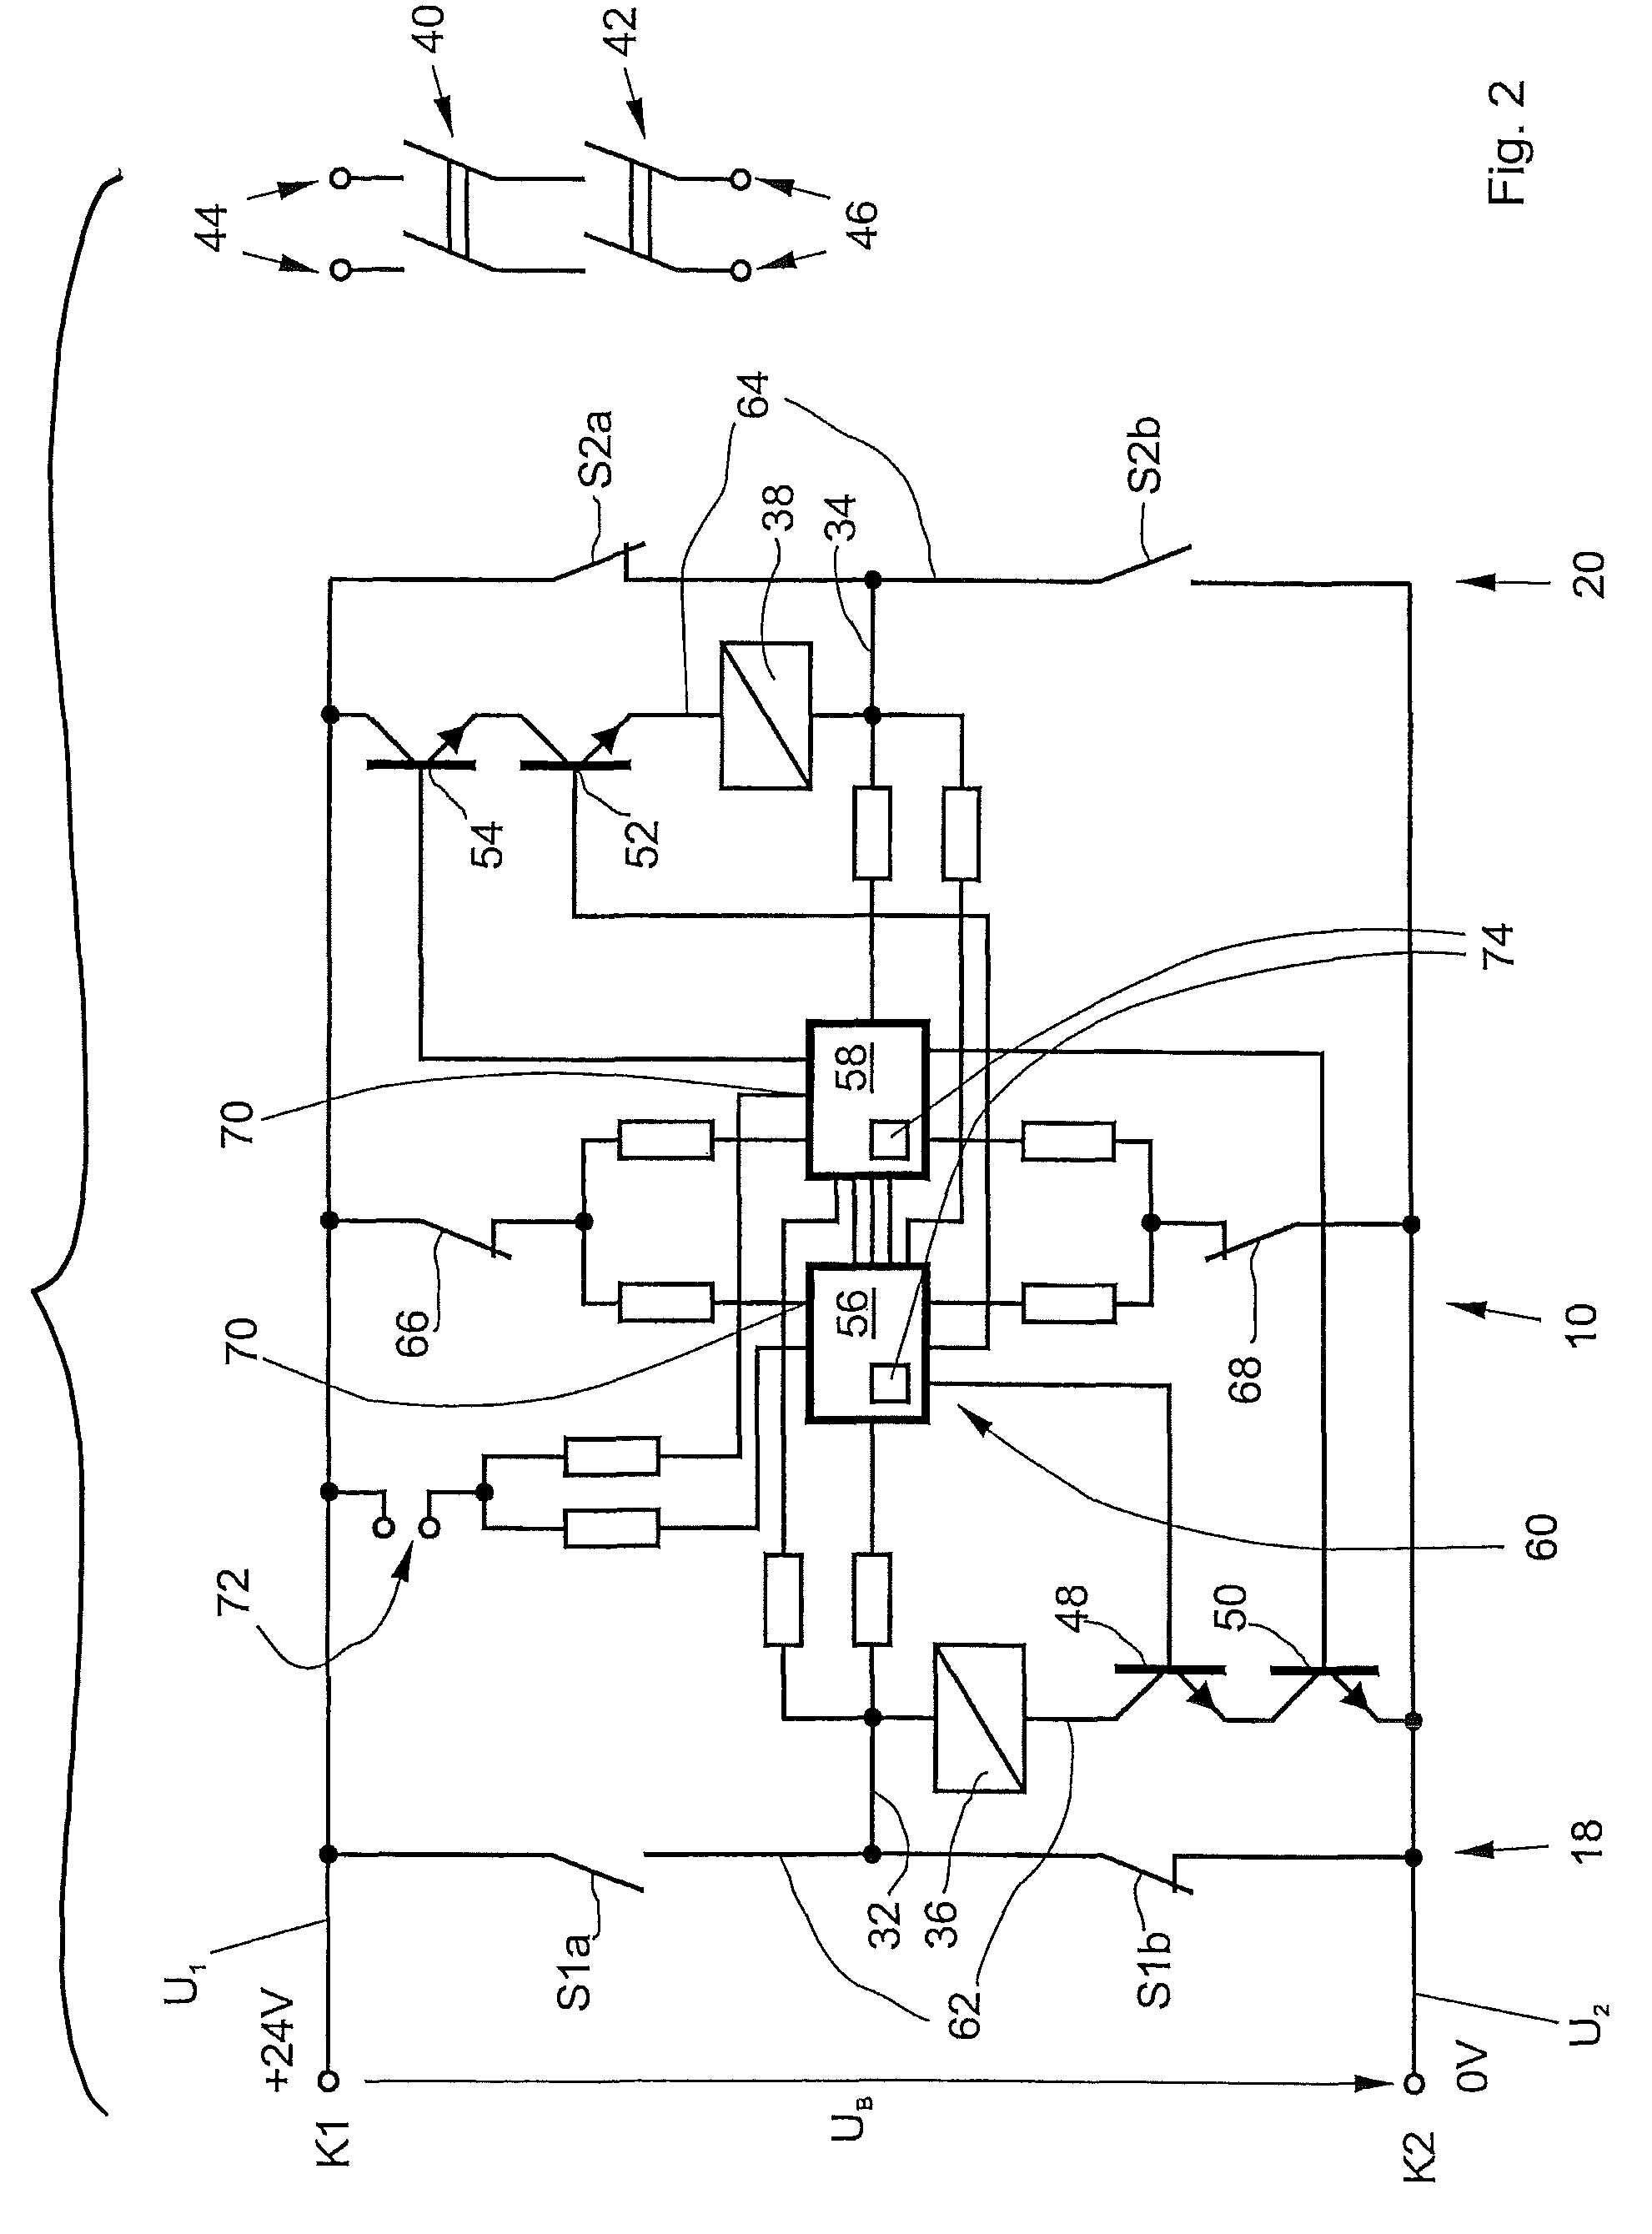 Safety switching apparatus and method for safely switching an electrical load on and off